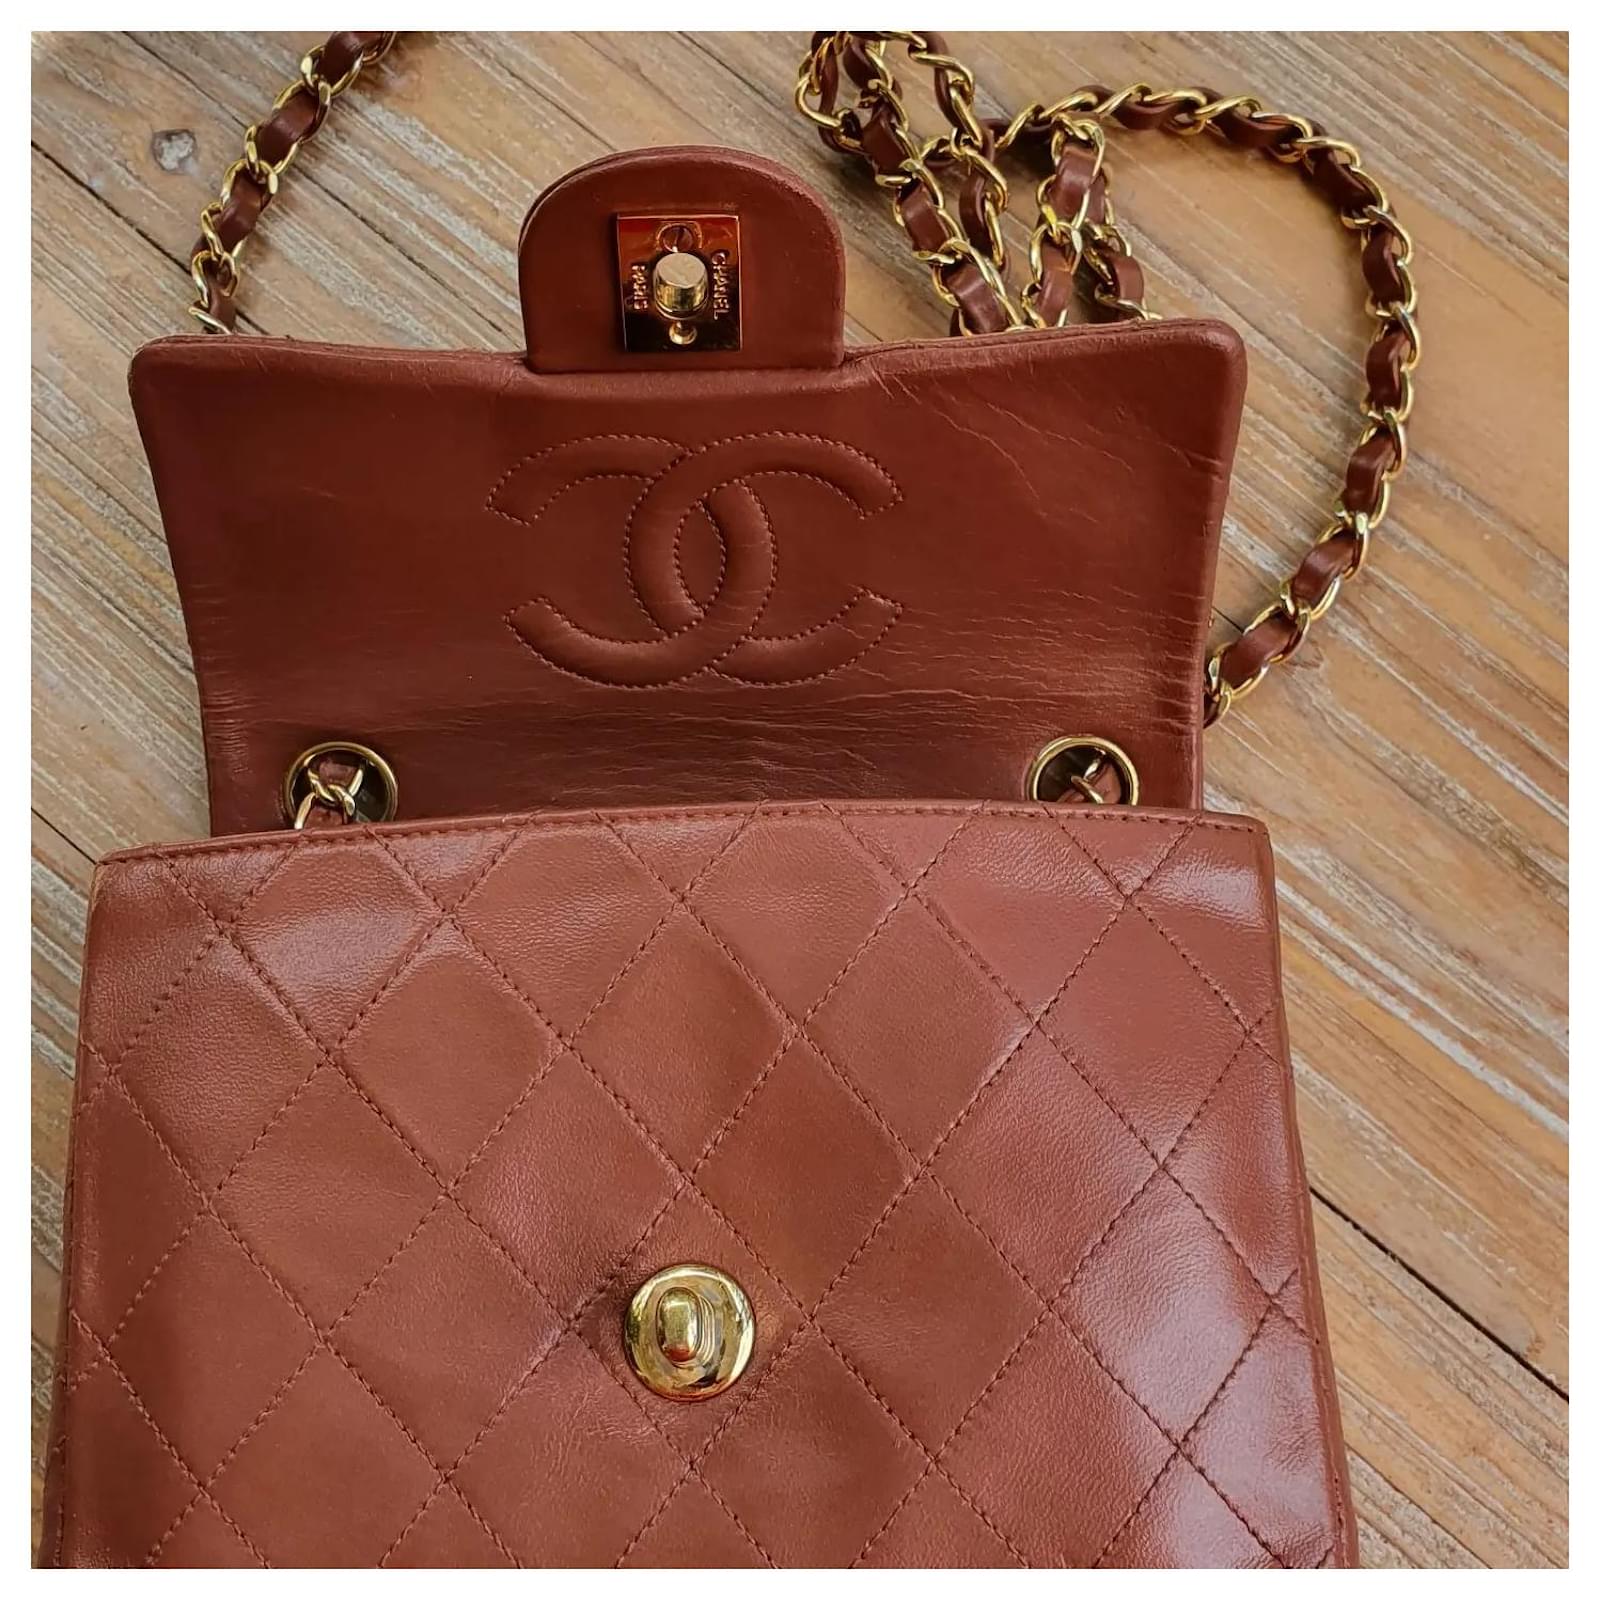 Can't get any better than a Chanel Vintage Maxi Flap Bag! http